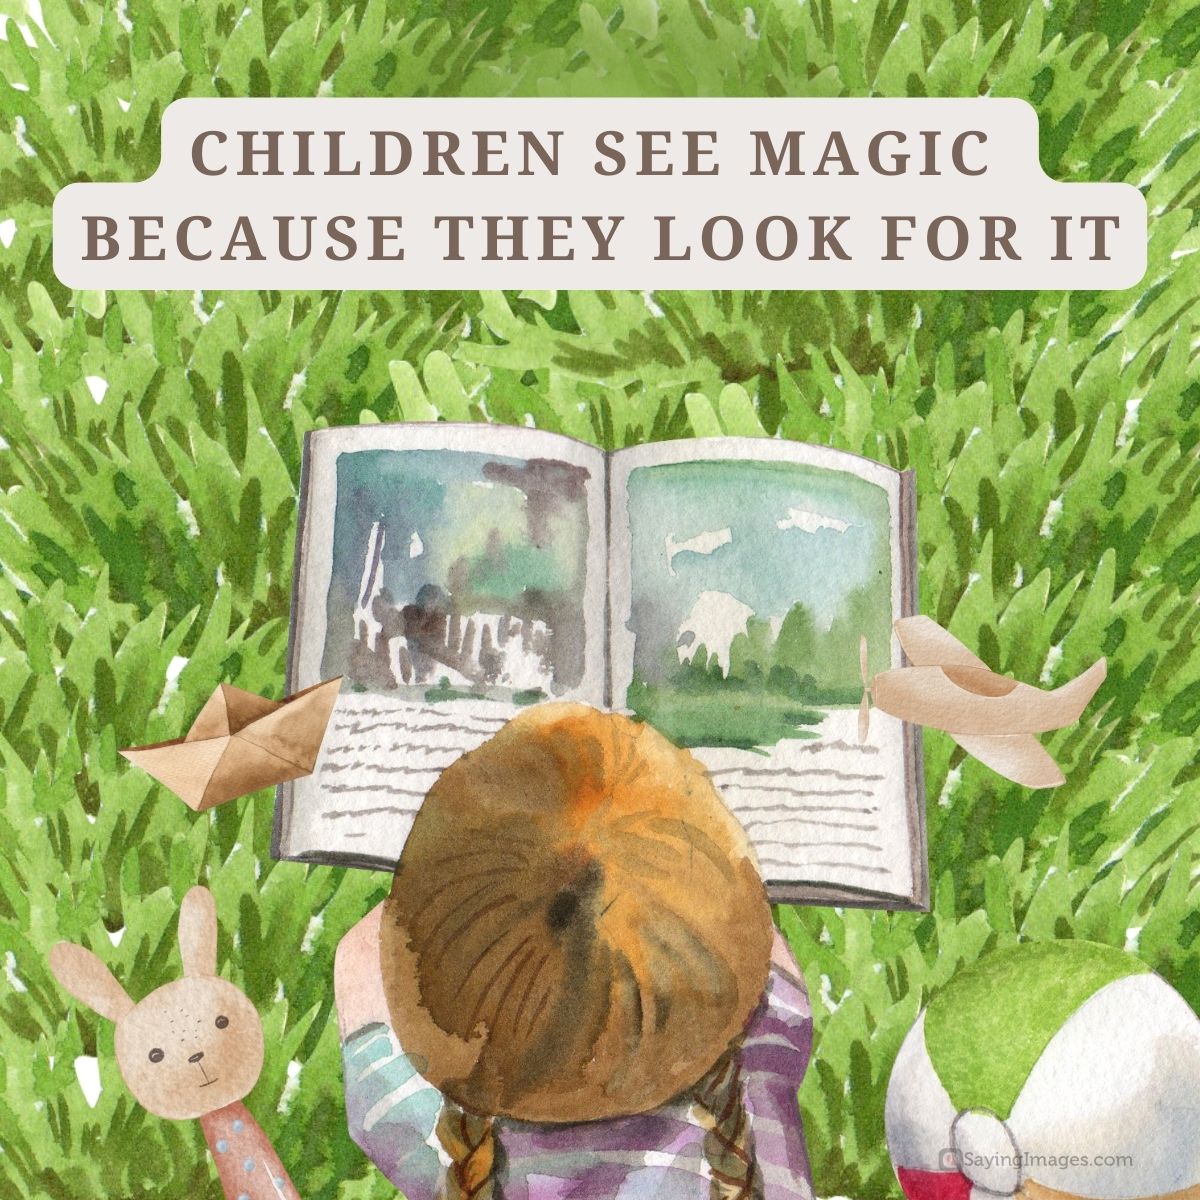 Children see magic because they look for it